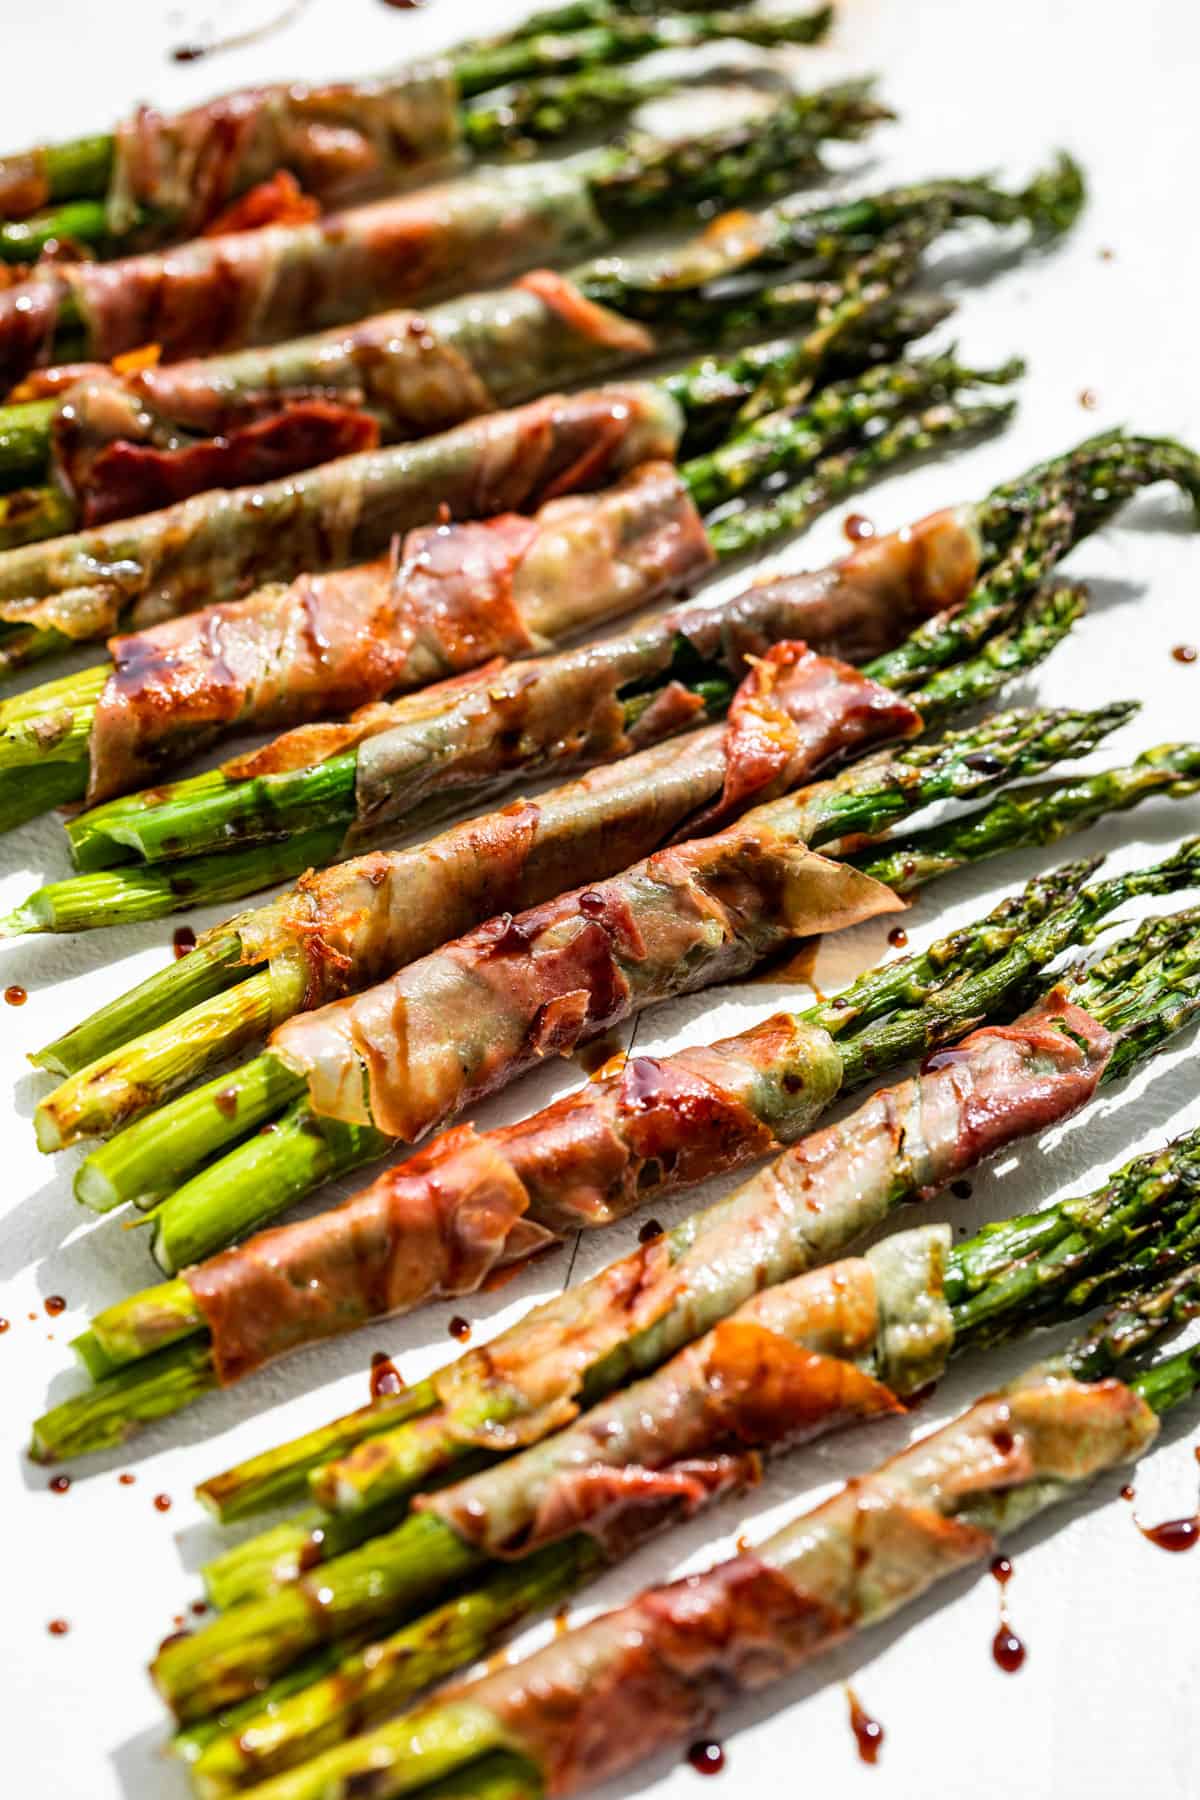 Side view of Prosciutto Wrapped Asparagus drizzled with reduced balsamic vinegar on a white background.